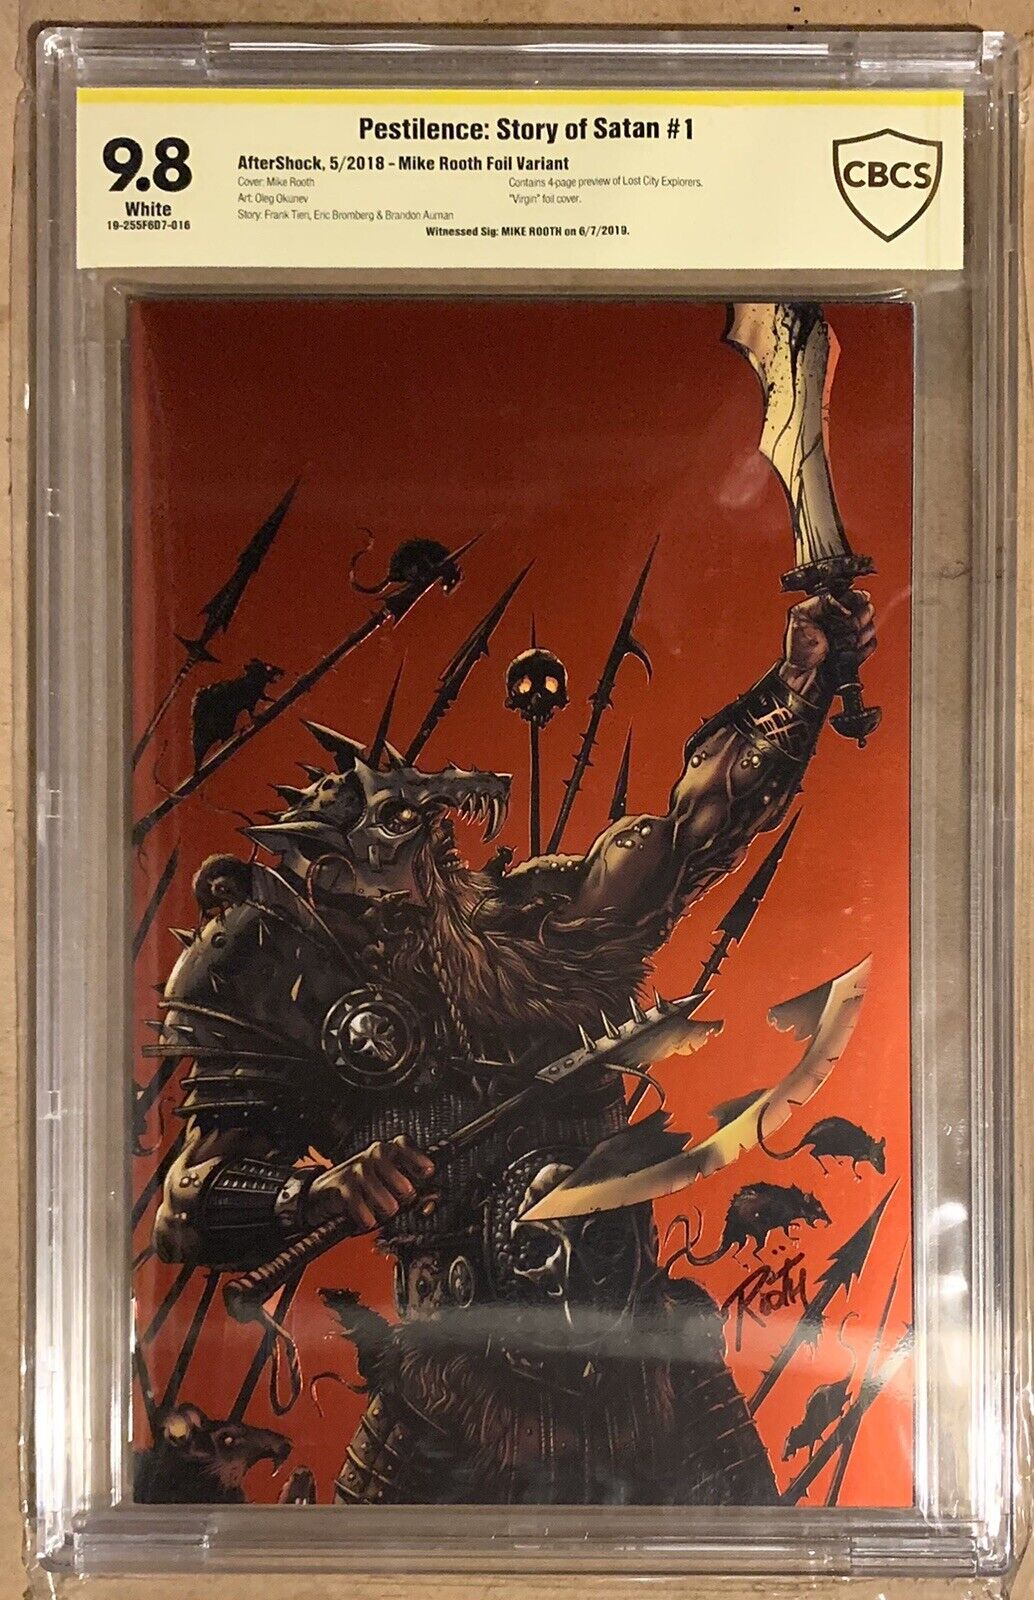 Pestilence: A Story of Satan #1 Foil Cover Graded CBCS 9.8 Signed by Mike Rooth